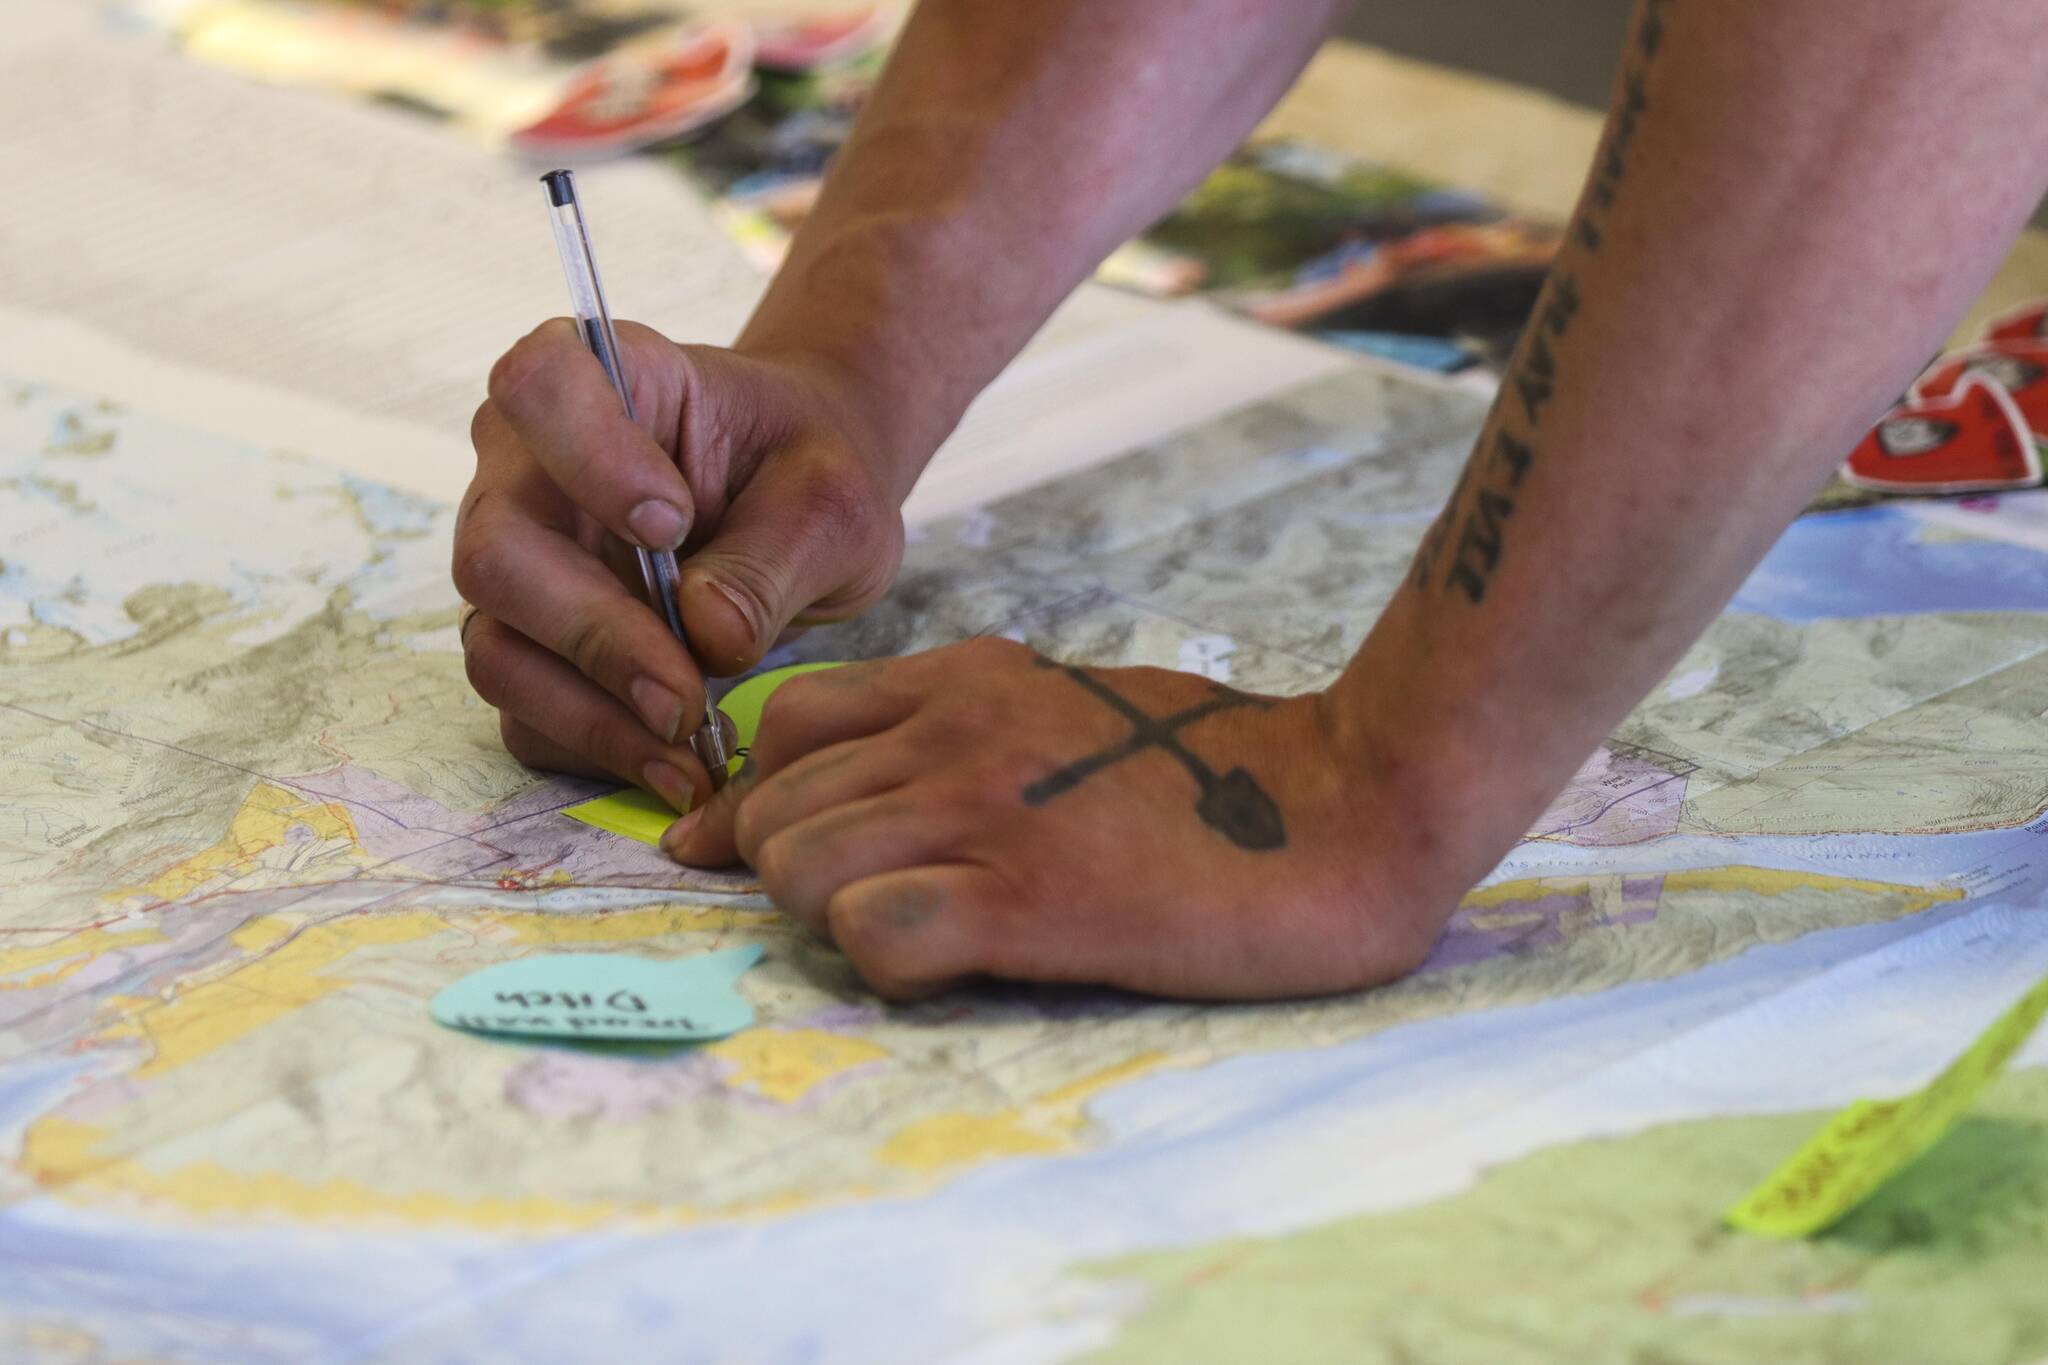 Trail Mix Inc’s project manager Duncan Campbell makes a notation on a map at the nonprofit’s new office during their National Trails Day event on June 4, 2022 (Michael S. Lockett / Juneau Empire)